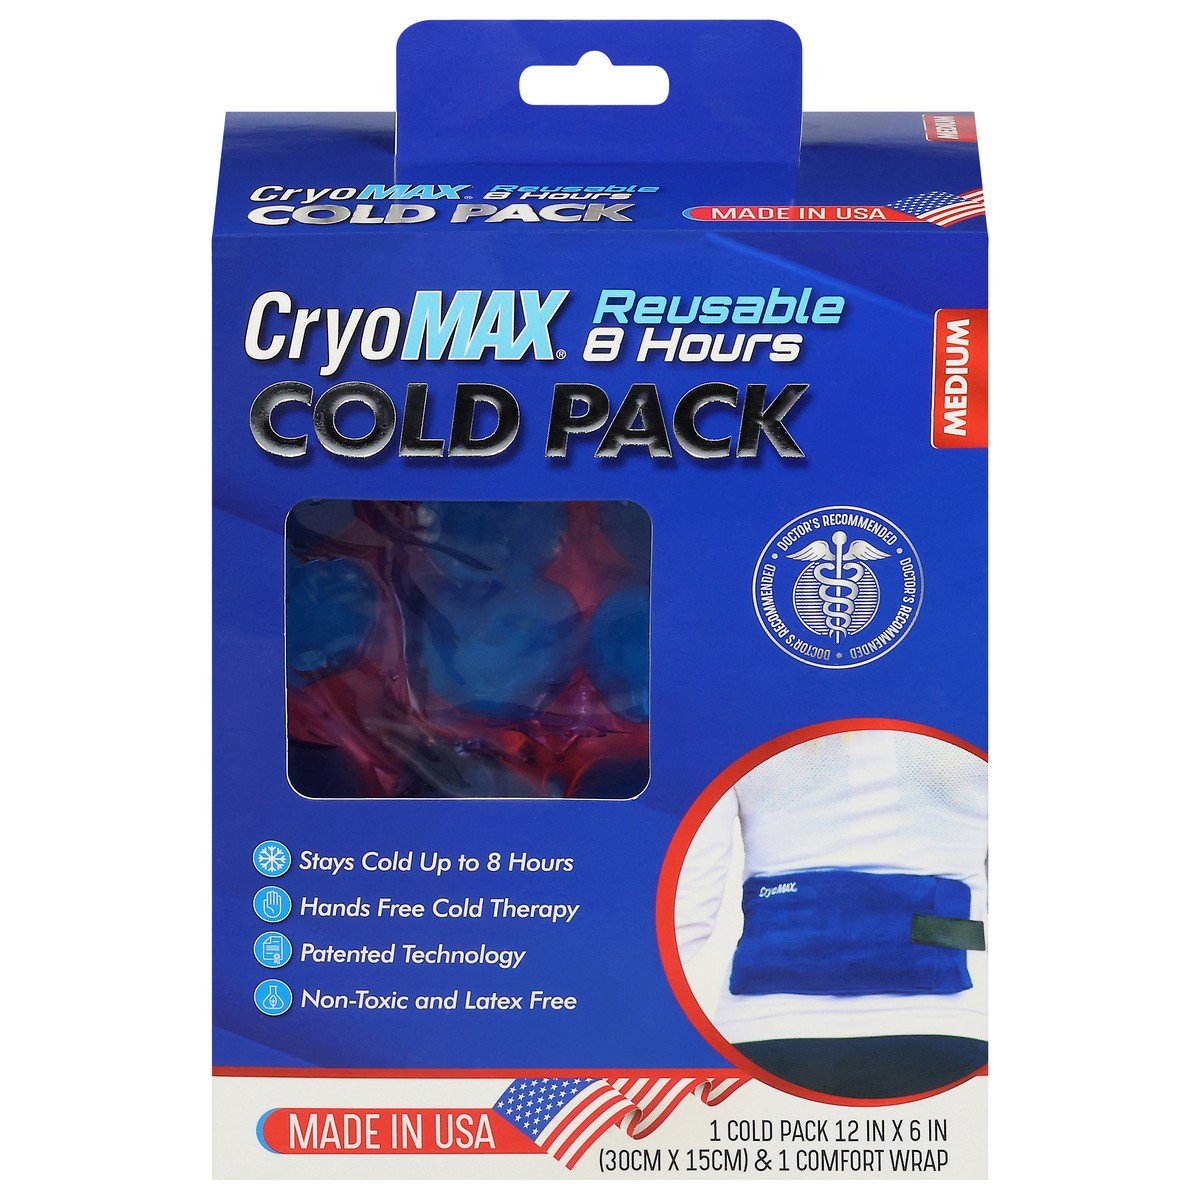 slide 1 of 67, CryoMax Medium Reusable 8 Hours Cold Pack 1 ea, 1 ct